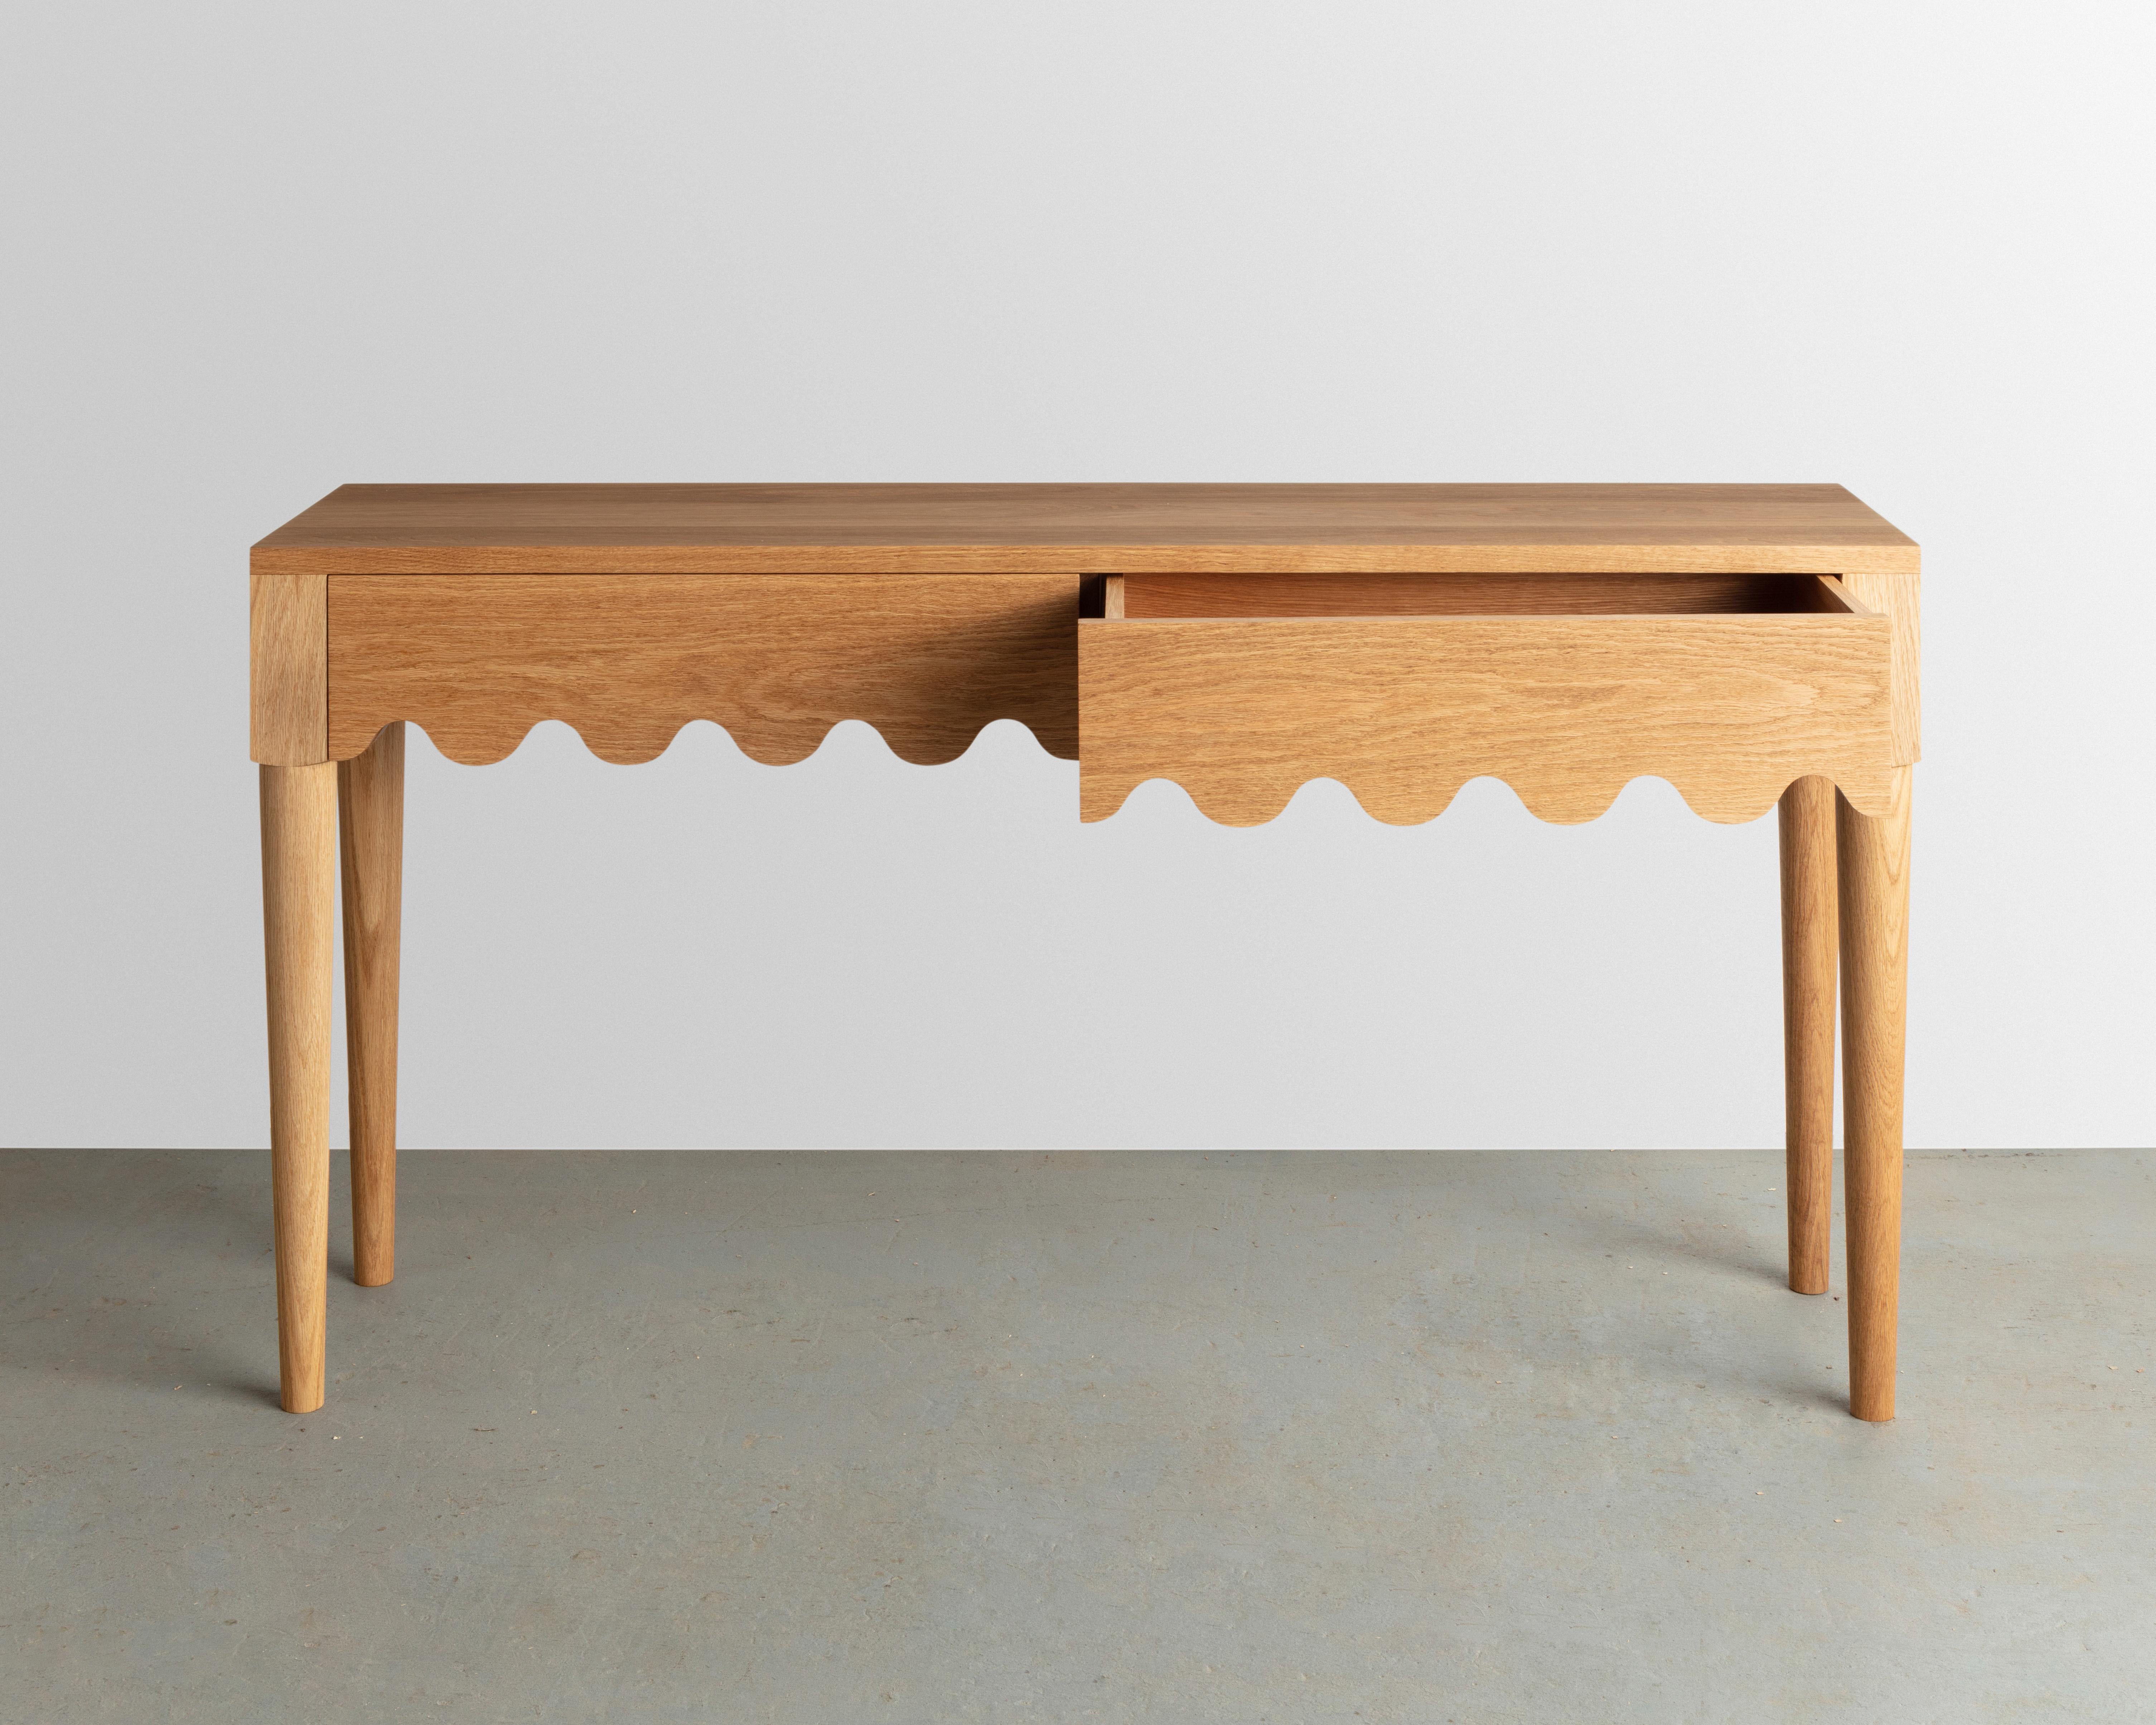 Designed and built in the studio this entryway table features a playful detail that continues along its double drawer faces and seamlessly wraps around its form. 

Made from solid oak-inspired by the French Mid-century designer Jean Royère.